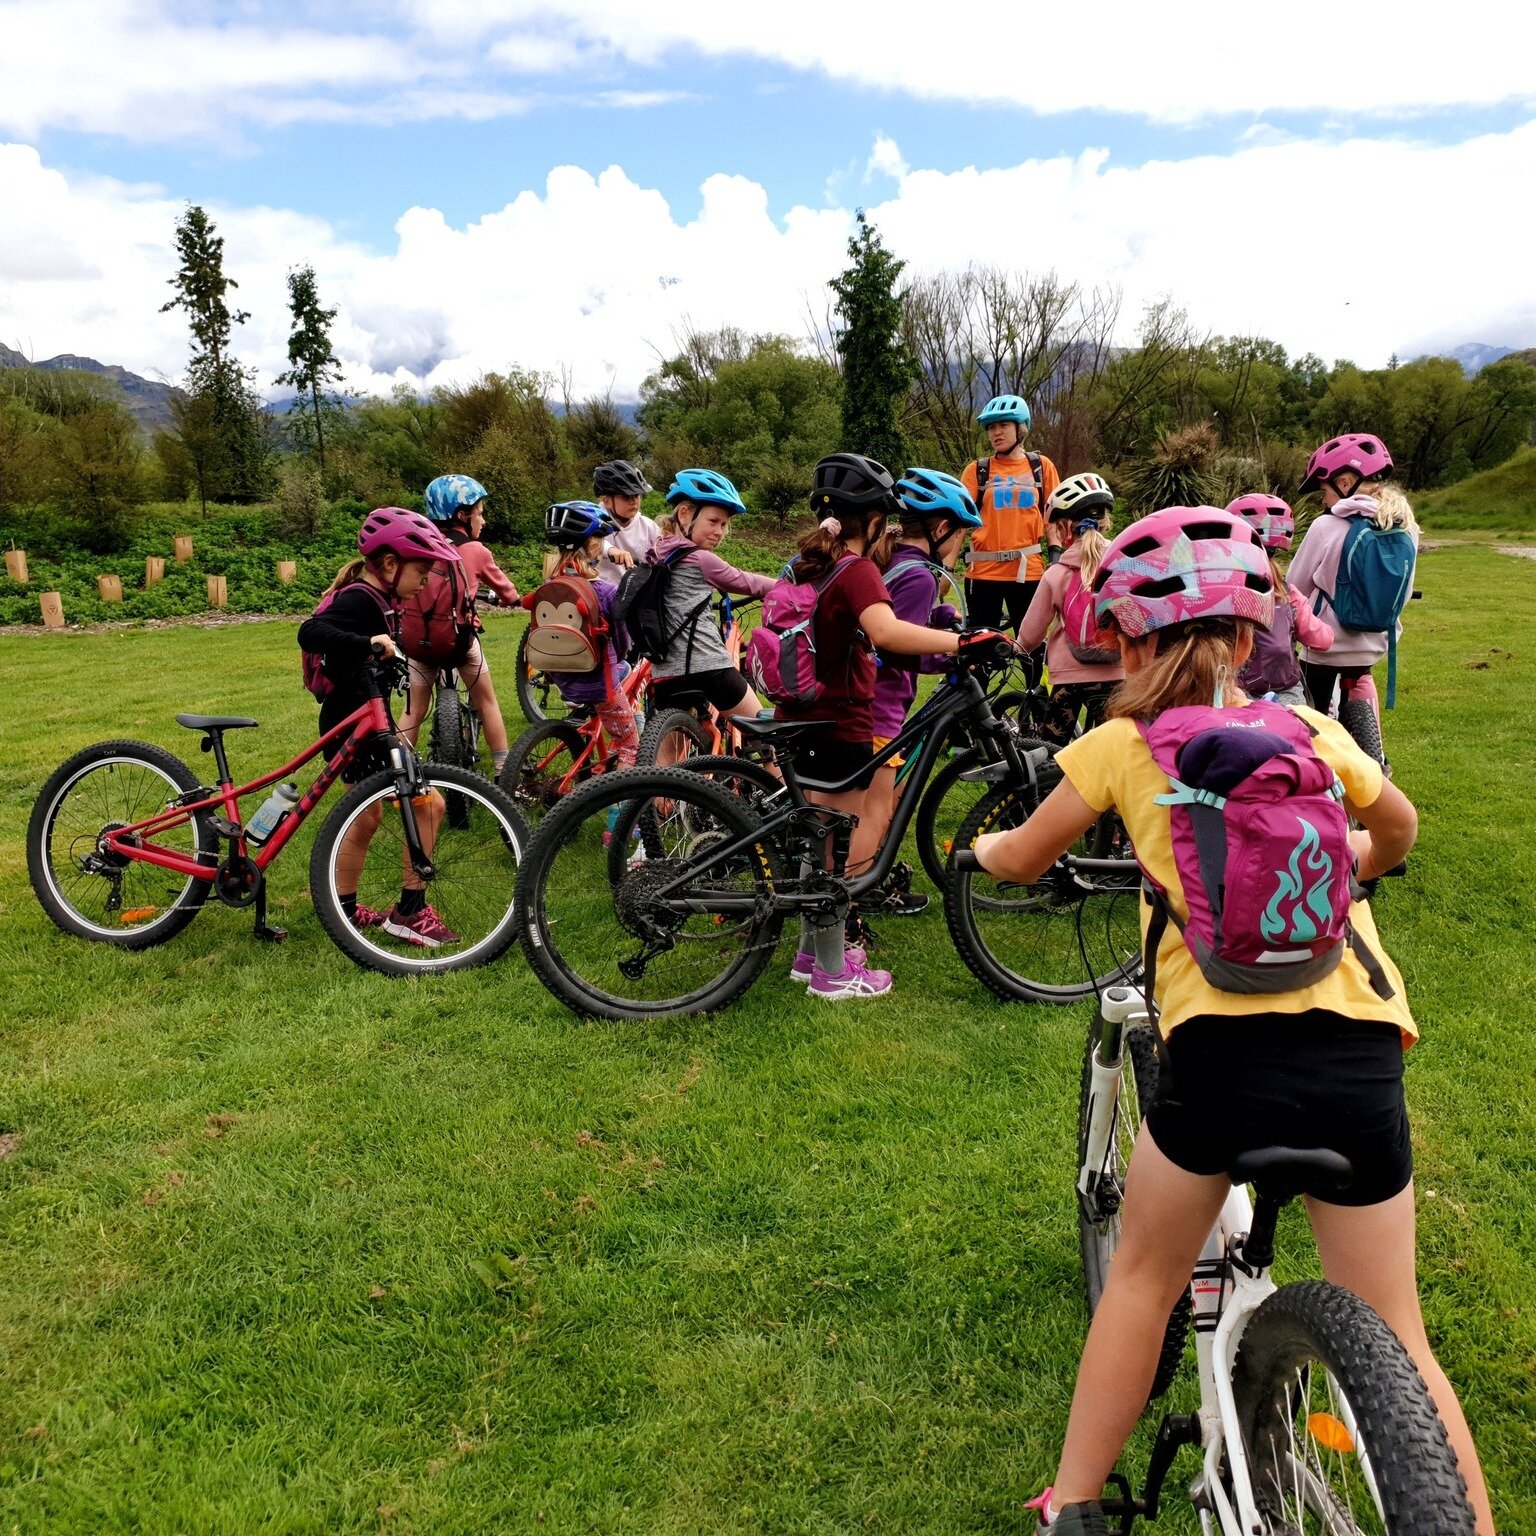 We had a fun weekend down here in Wānaka, hosting our free 'Bring a friend, make a friend' event at @bikeglendhu !

We were stoked to have 20 young 7-12 yr old girls come along and ride some great trails and meet some new friends. 

We're stoked to b